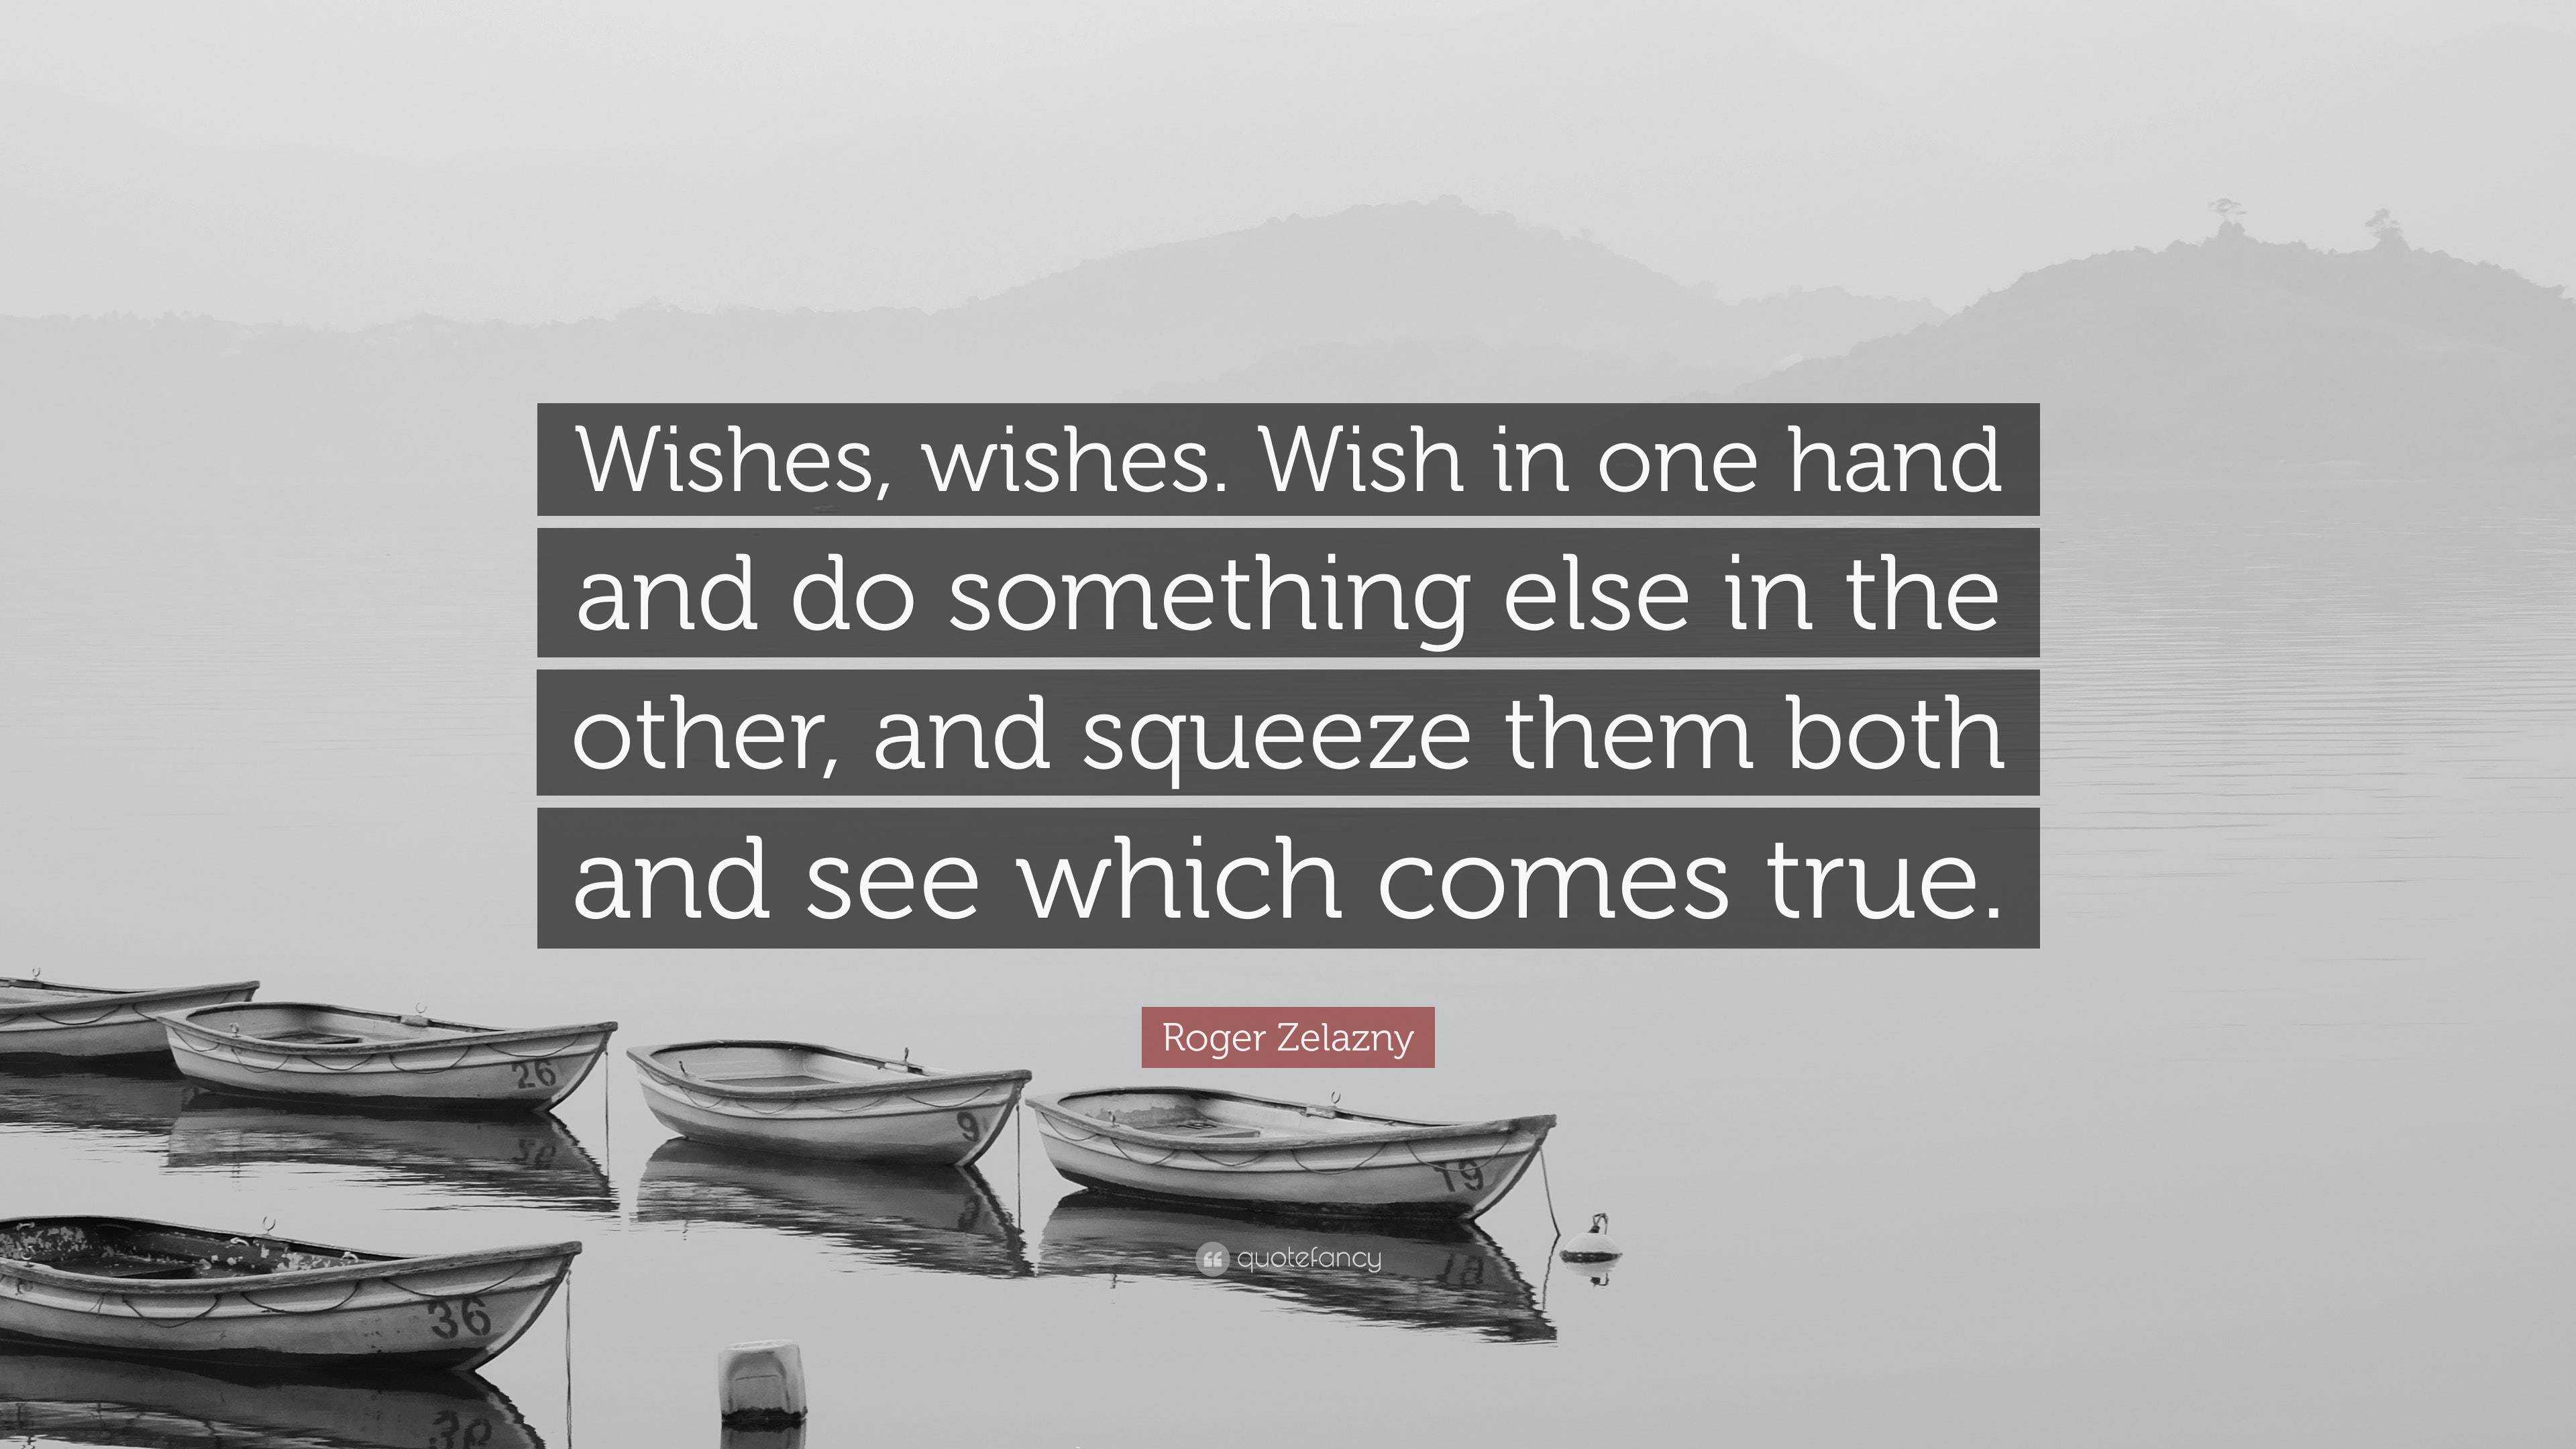 Roger Zelazny Quote Wishes Wishes Wish In One Hand And Do Something Else In The Other